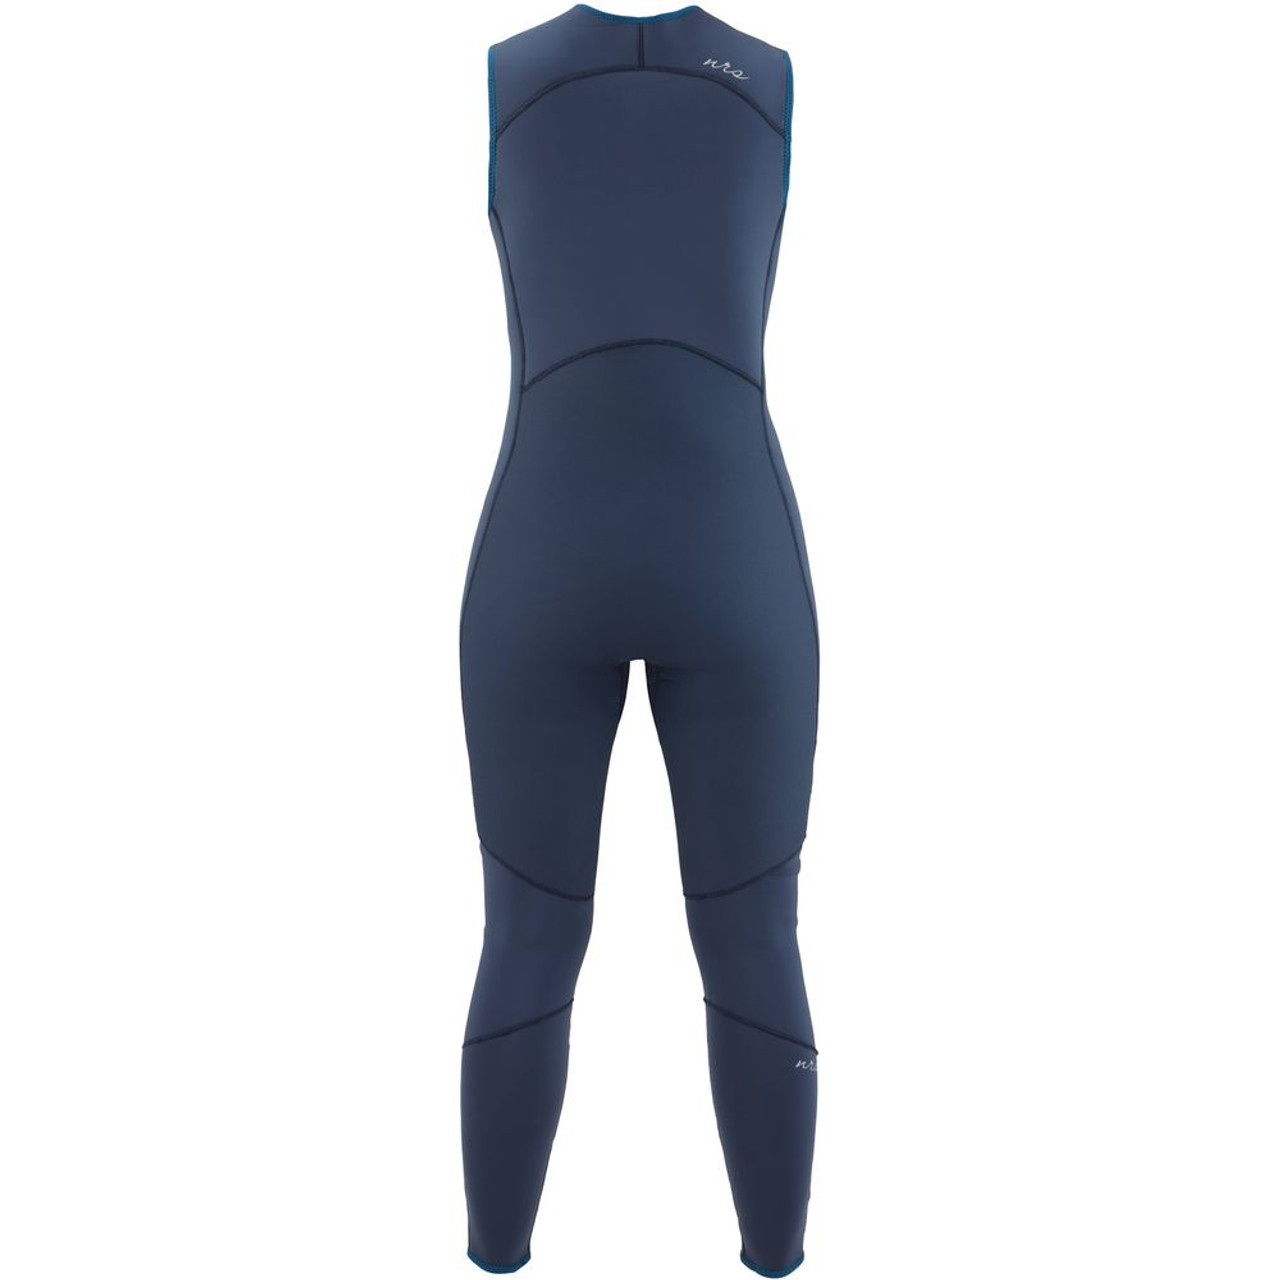 Wetsuit for Fishing  Wetsuit Wearhouse Blog